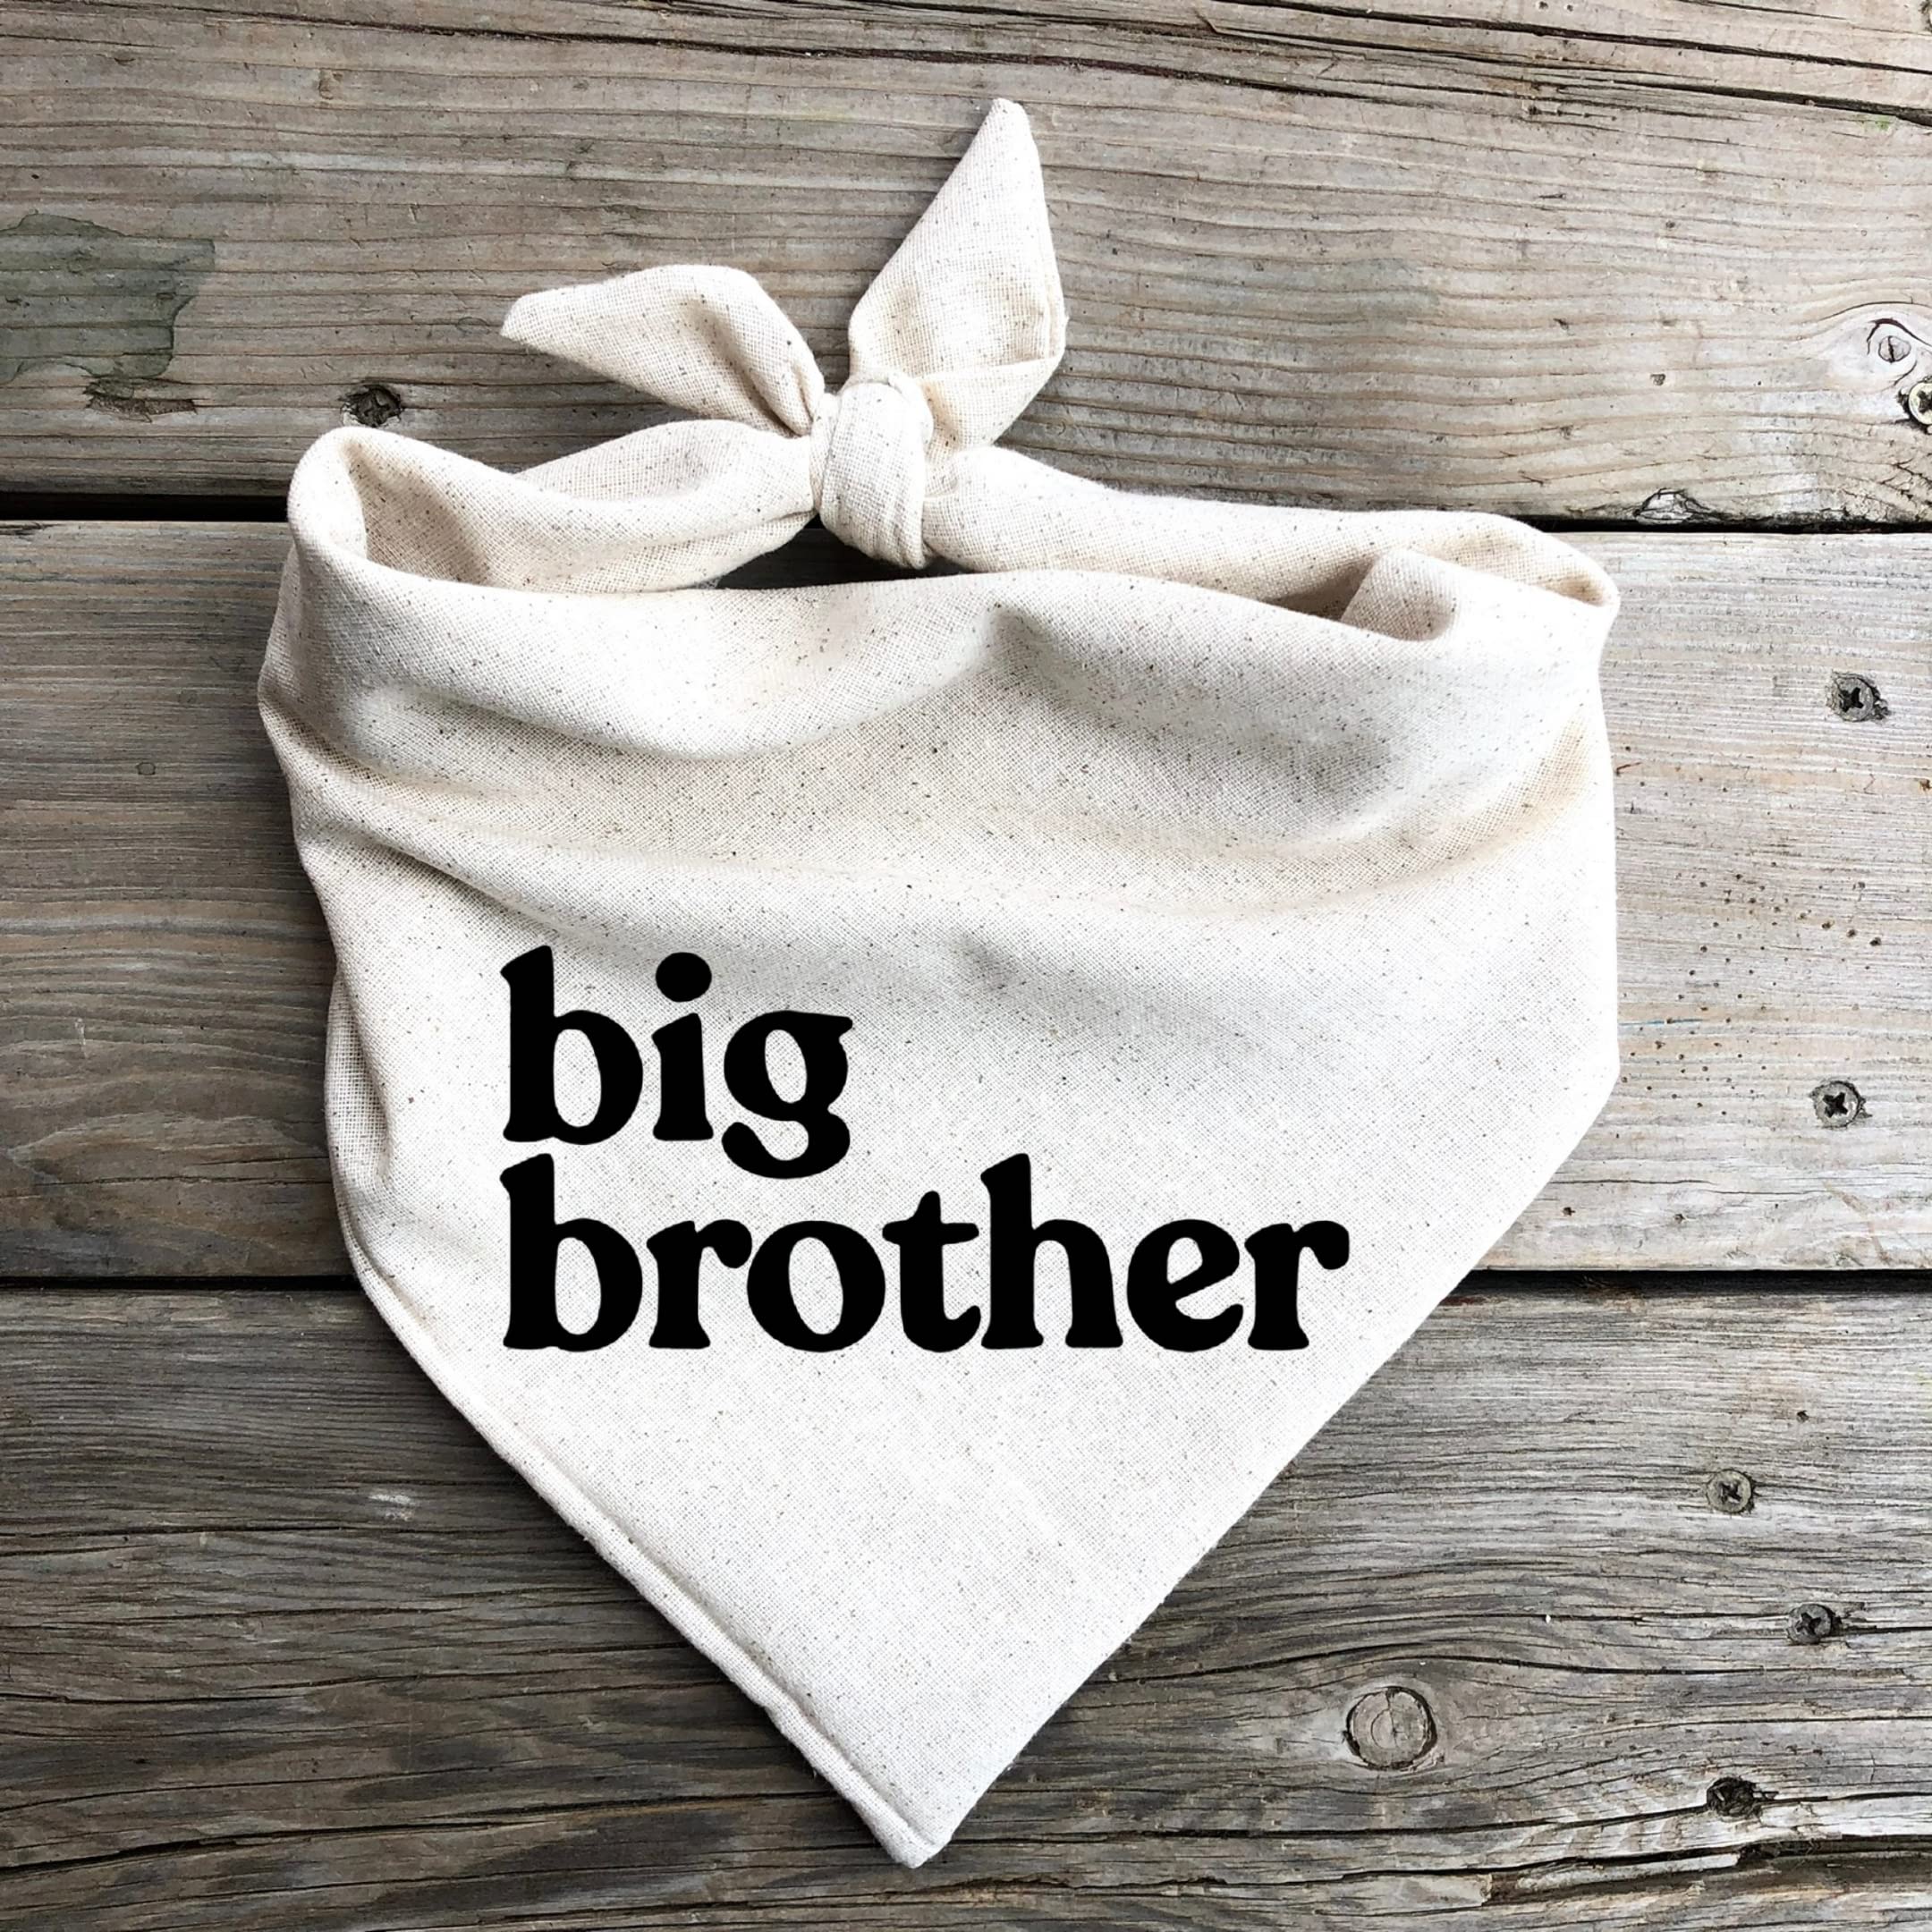 Dog Bandana Pregnancy Announcement Big Brother Baby Reveal Oatmeal Cream Minimal Neutral Color Announcement to Family (Large)